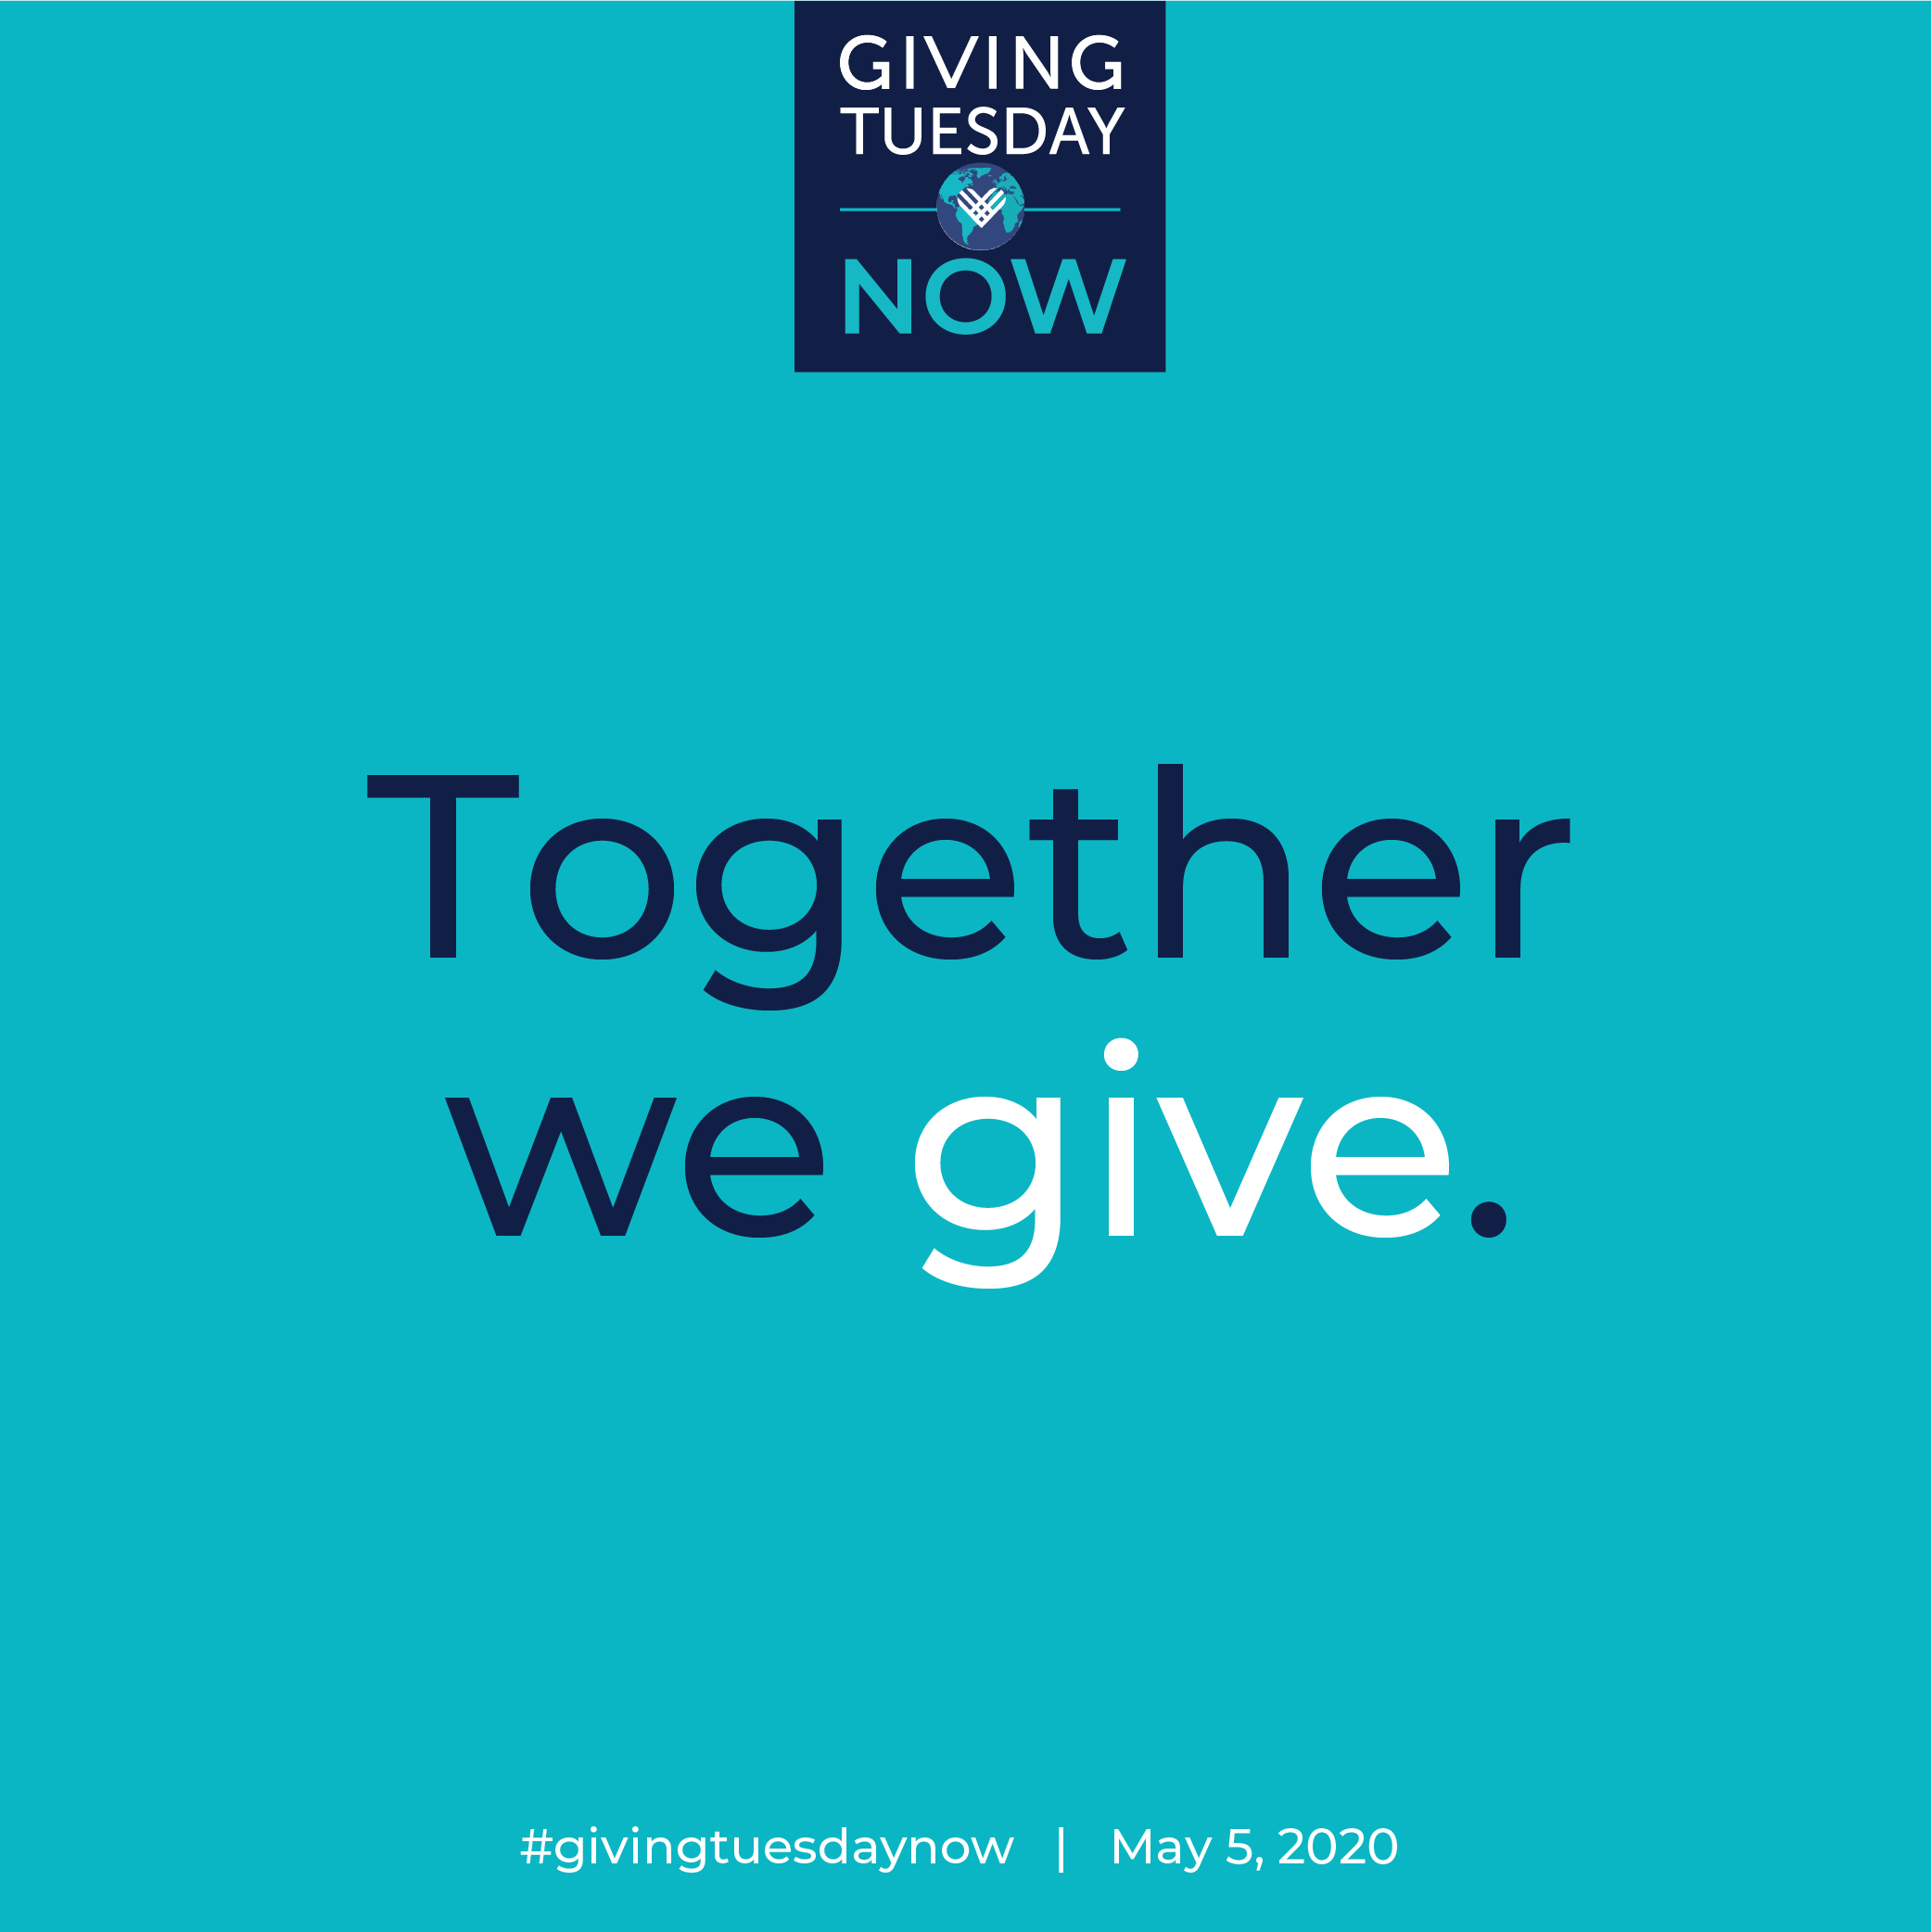 A graphic that reads, "Giving Tuesday NOW. Together we give."